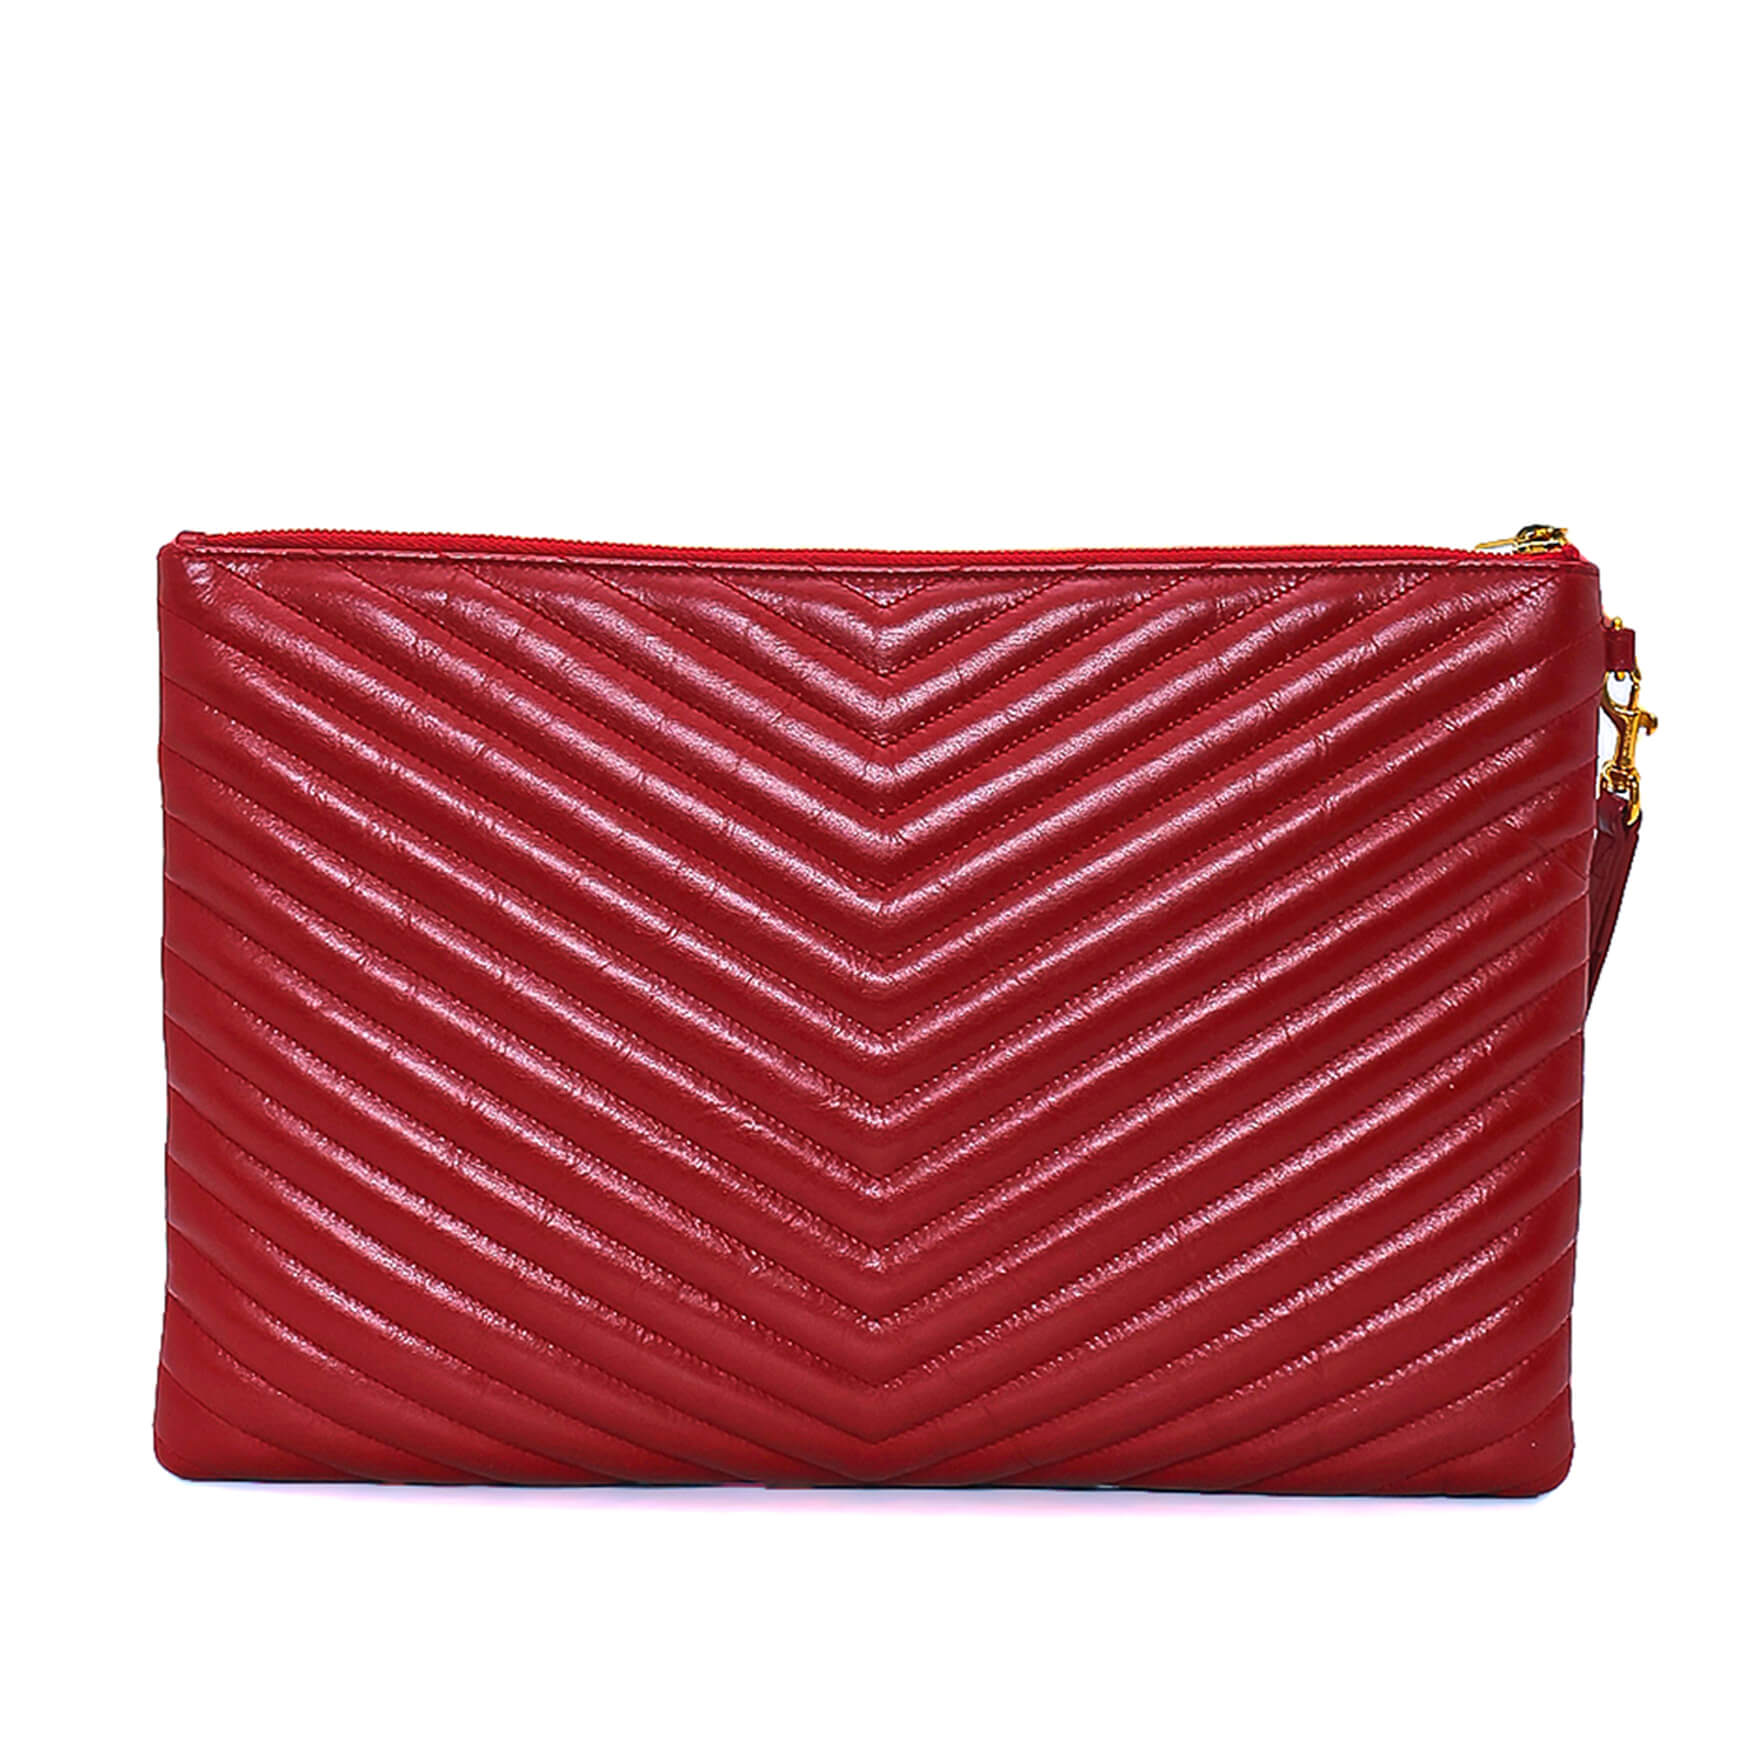 Yves Saint Laurent - Red Chevron Leather Large Pouch 